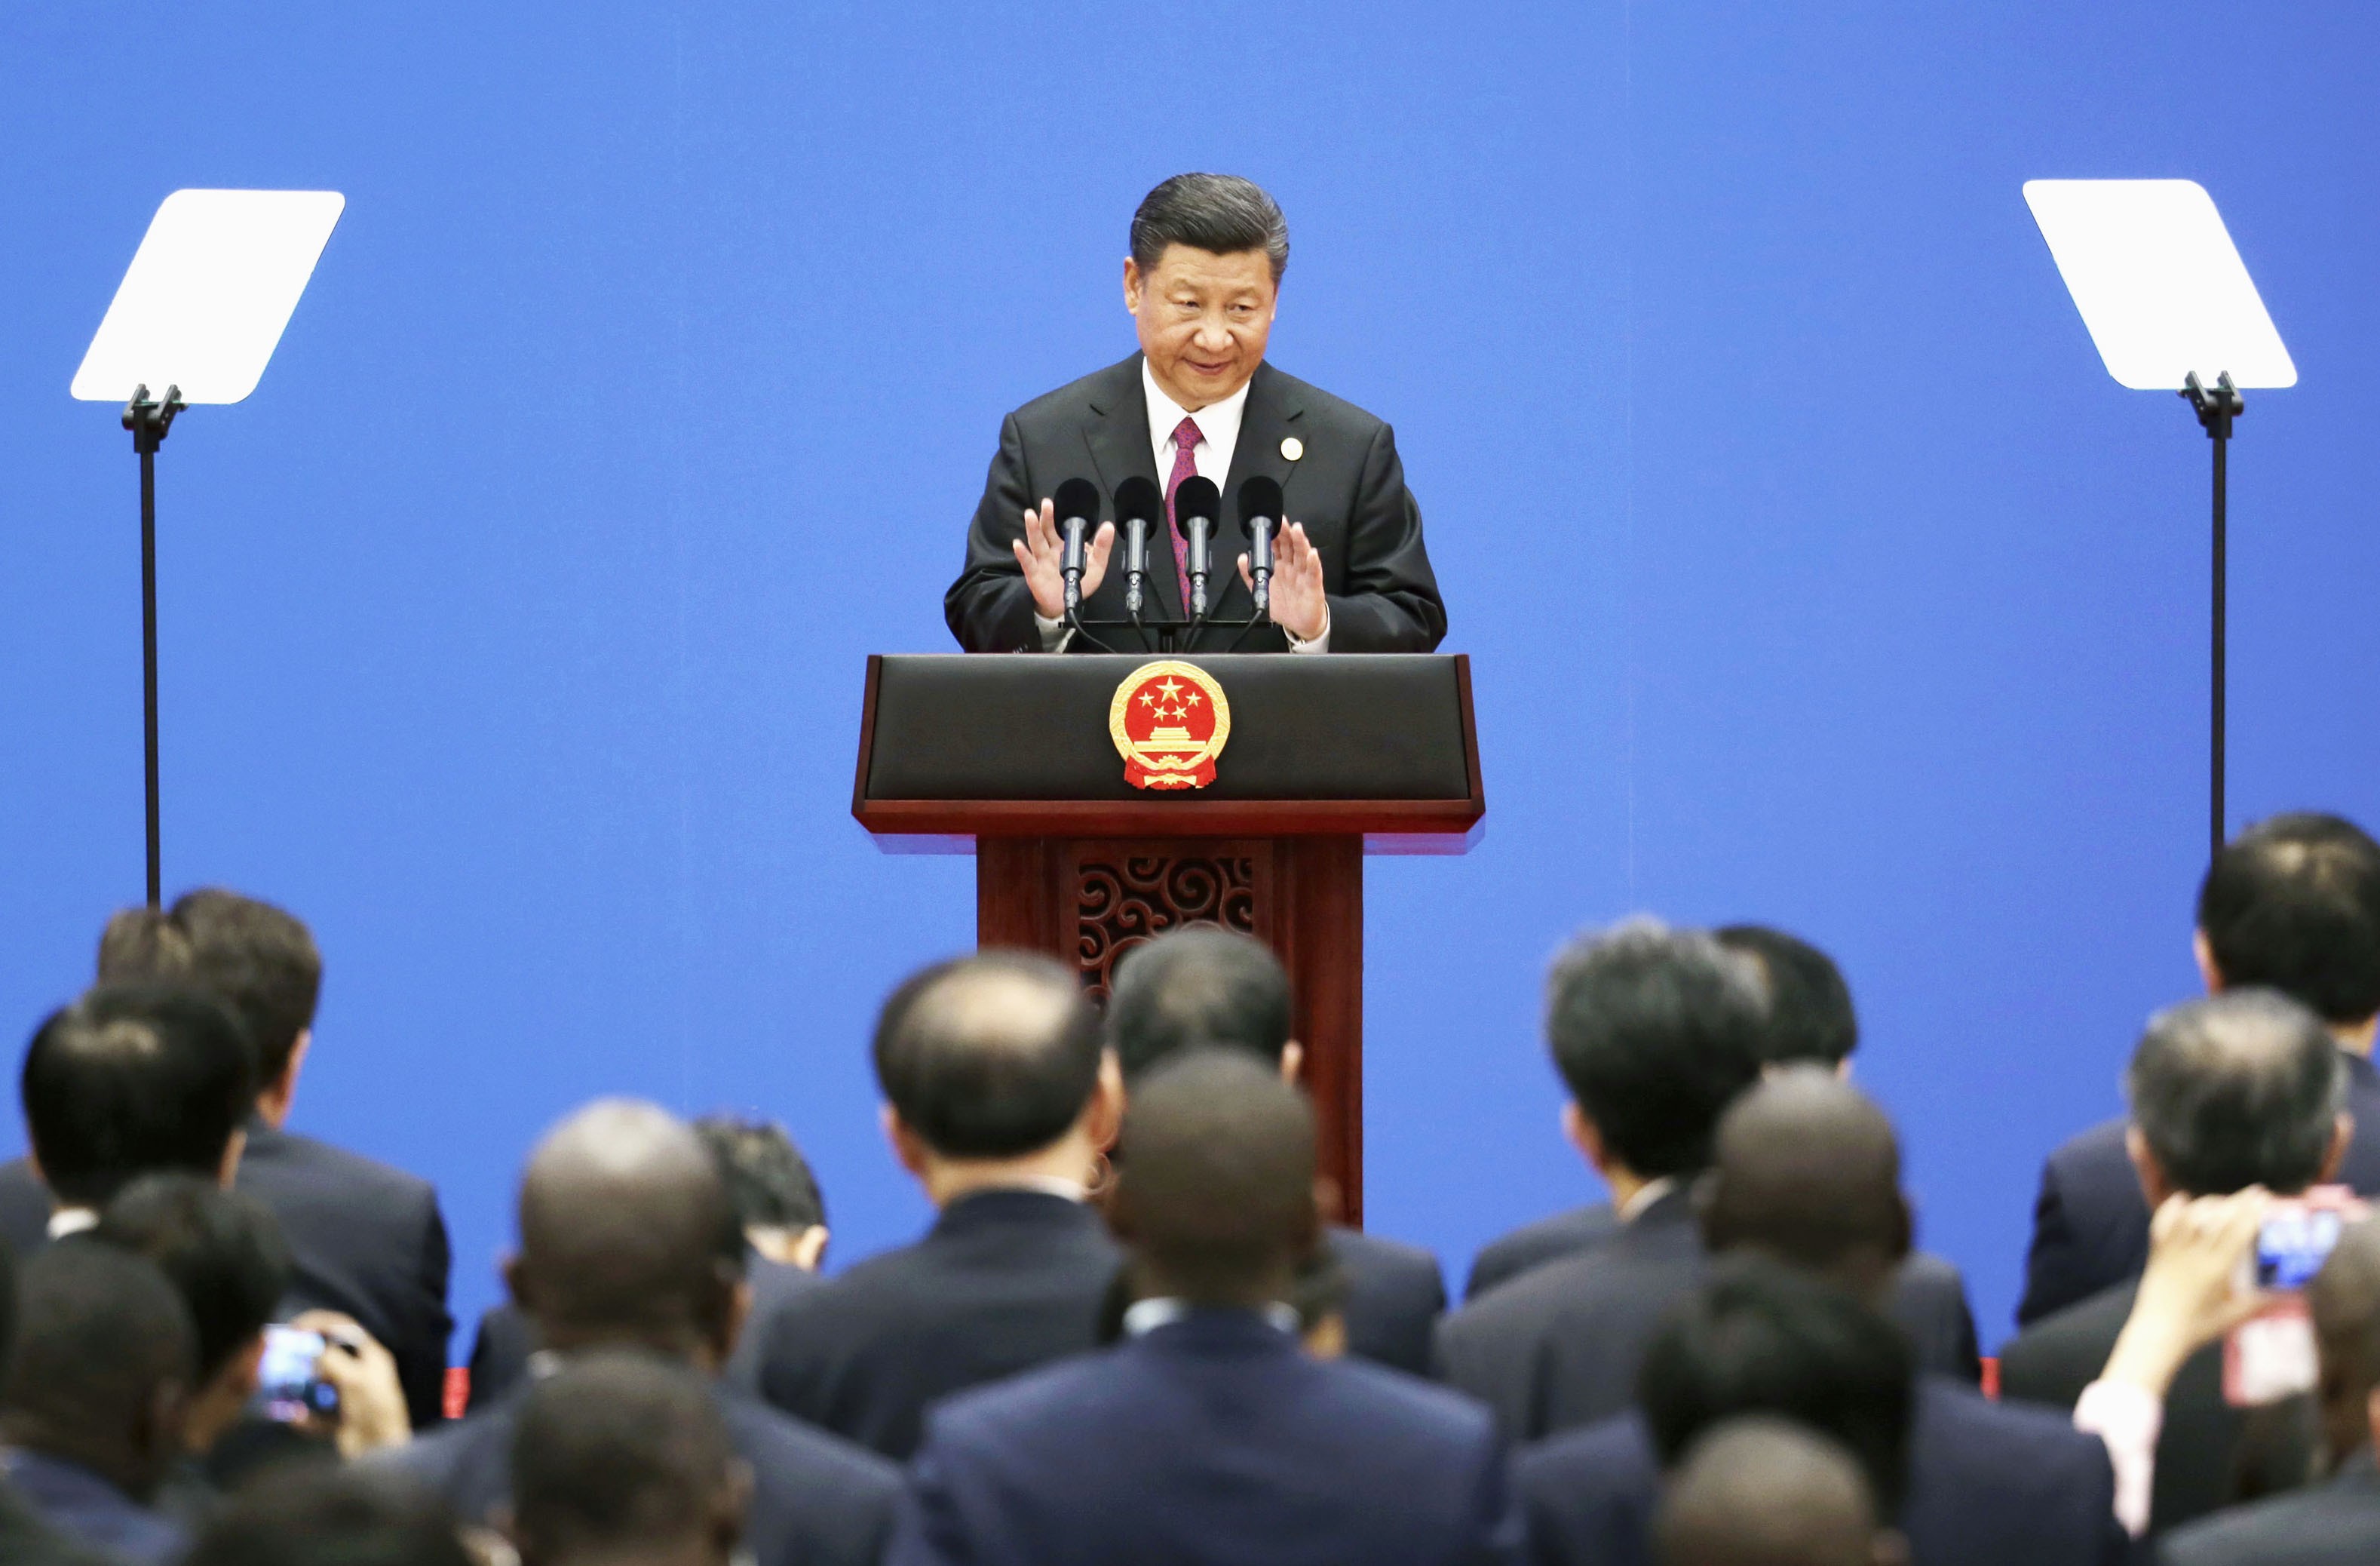 President Xi Jinping holds a press conference after a summit at the Belt and Road Forum for International Cooperation in Beijing in May. Xi said his initiative to develop economic links along the ancient Silk Road and beyond will help rebalance globalisation. Photo: Kyodo